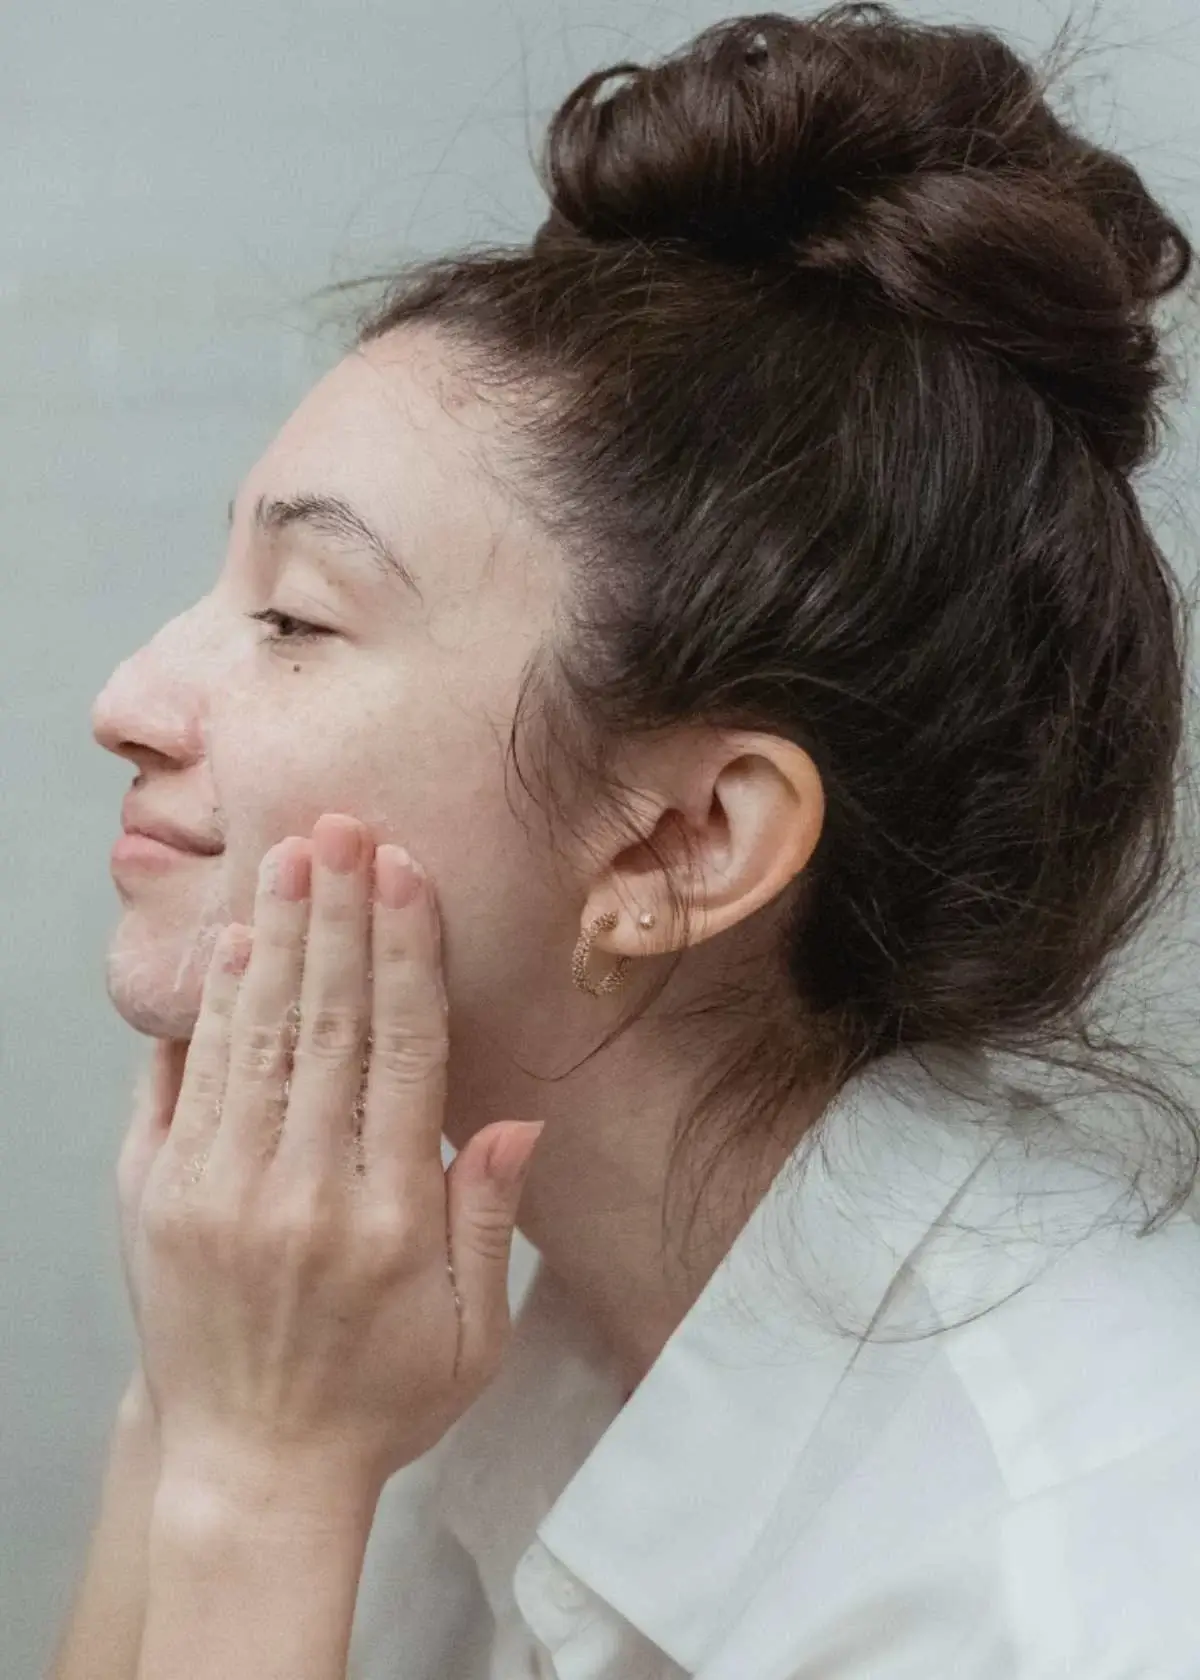 How to Know if You're Washing Your Face Too Much